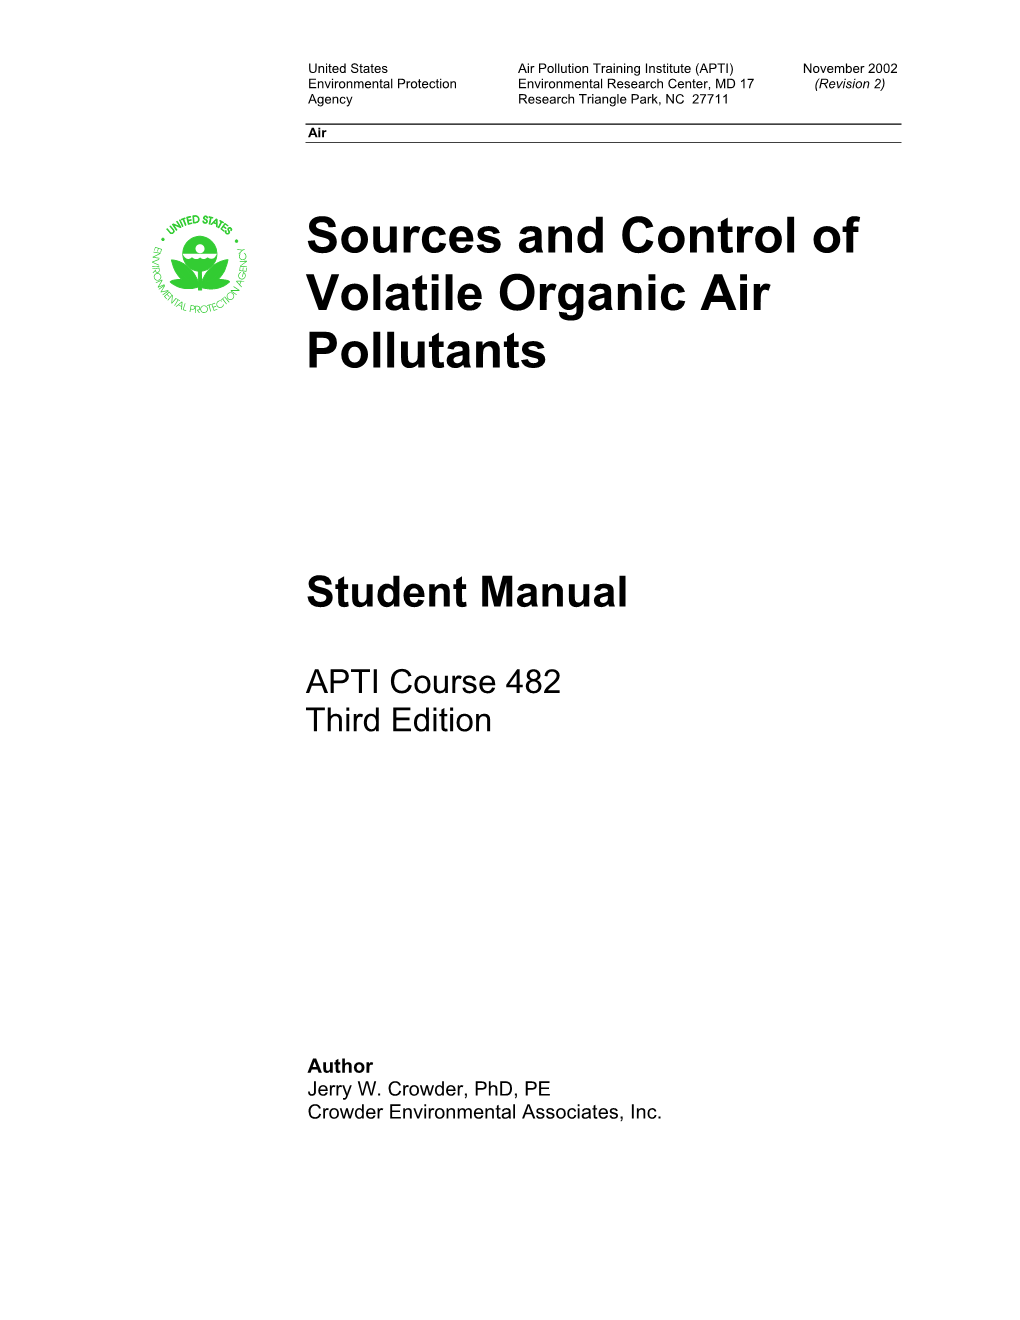 Sources and Control of Volatile Organic Air Pollutants